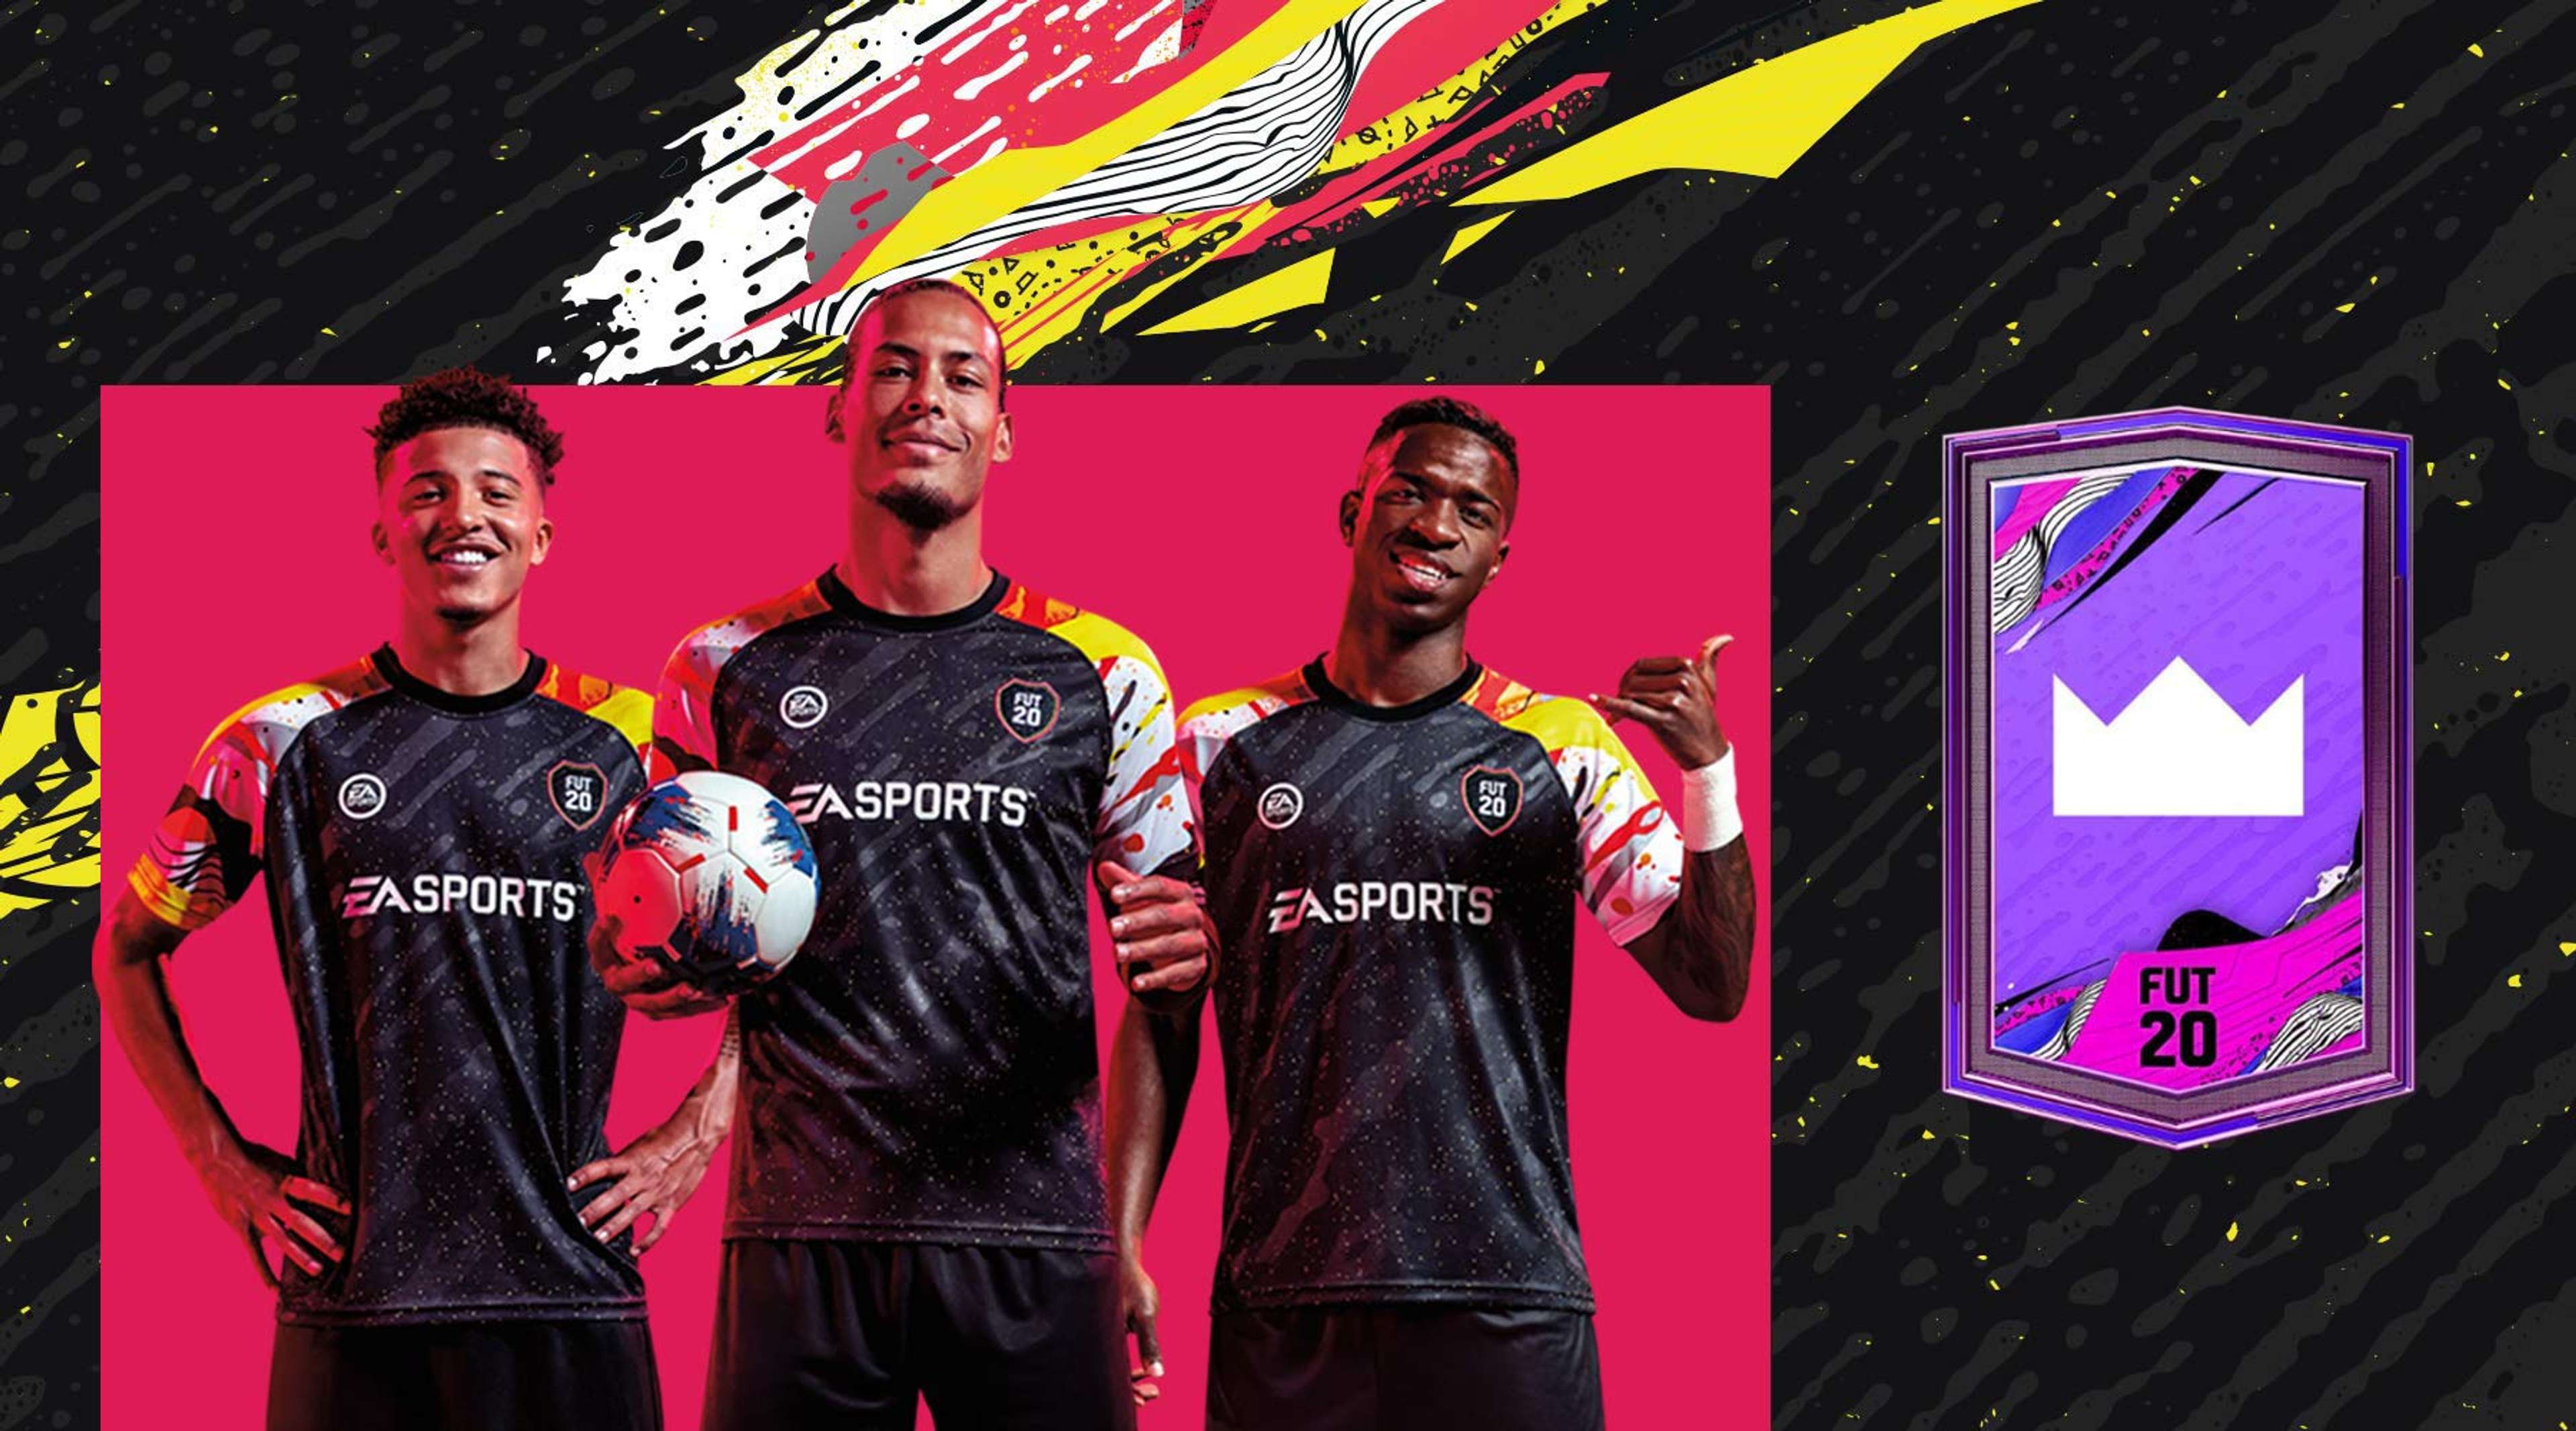 FIFA 20 Twitch prime Pack